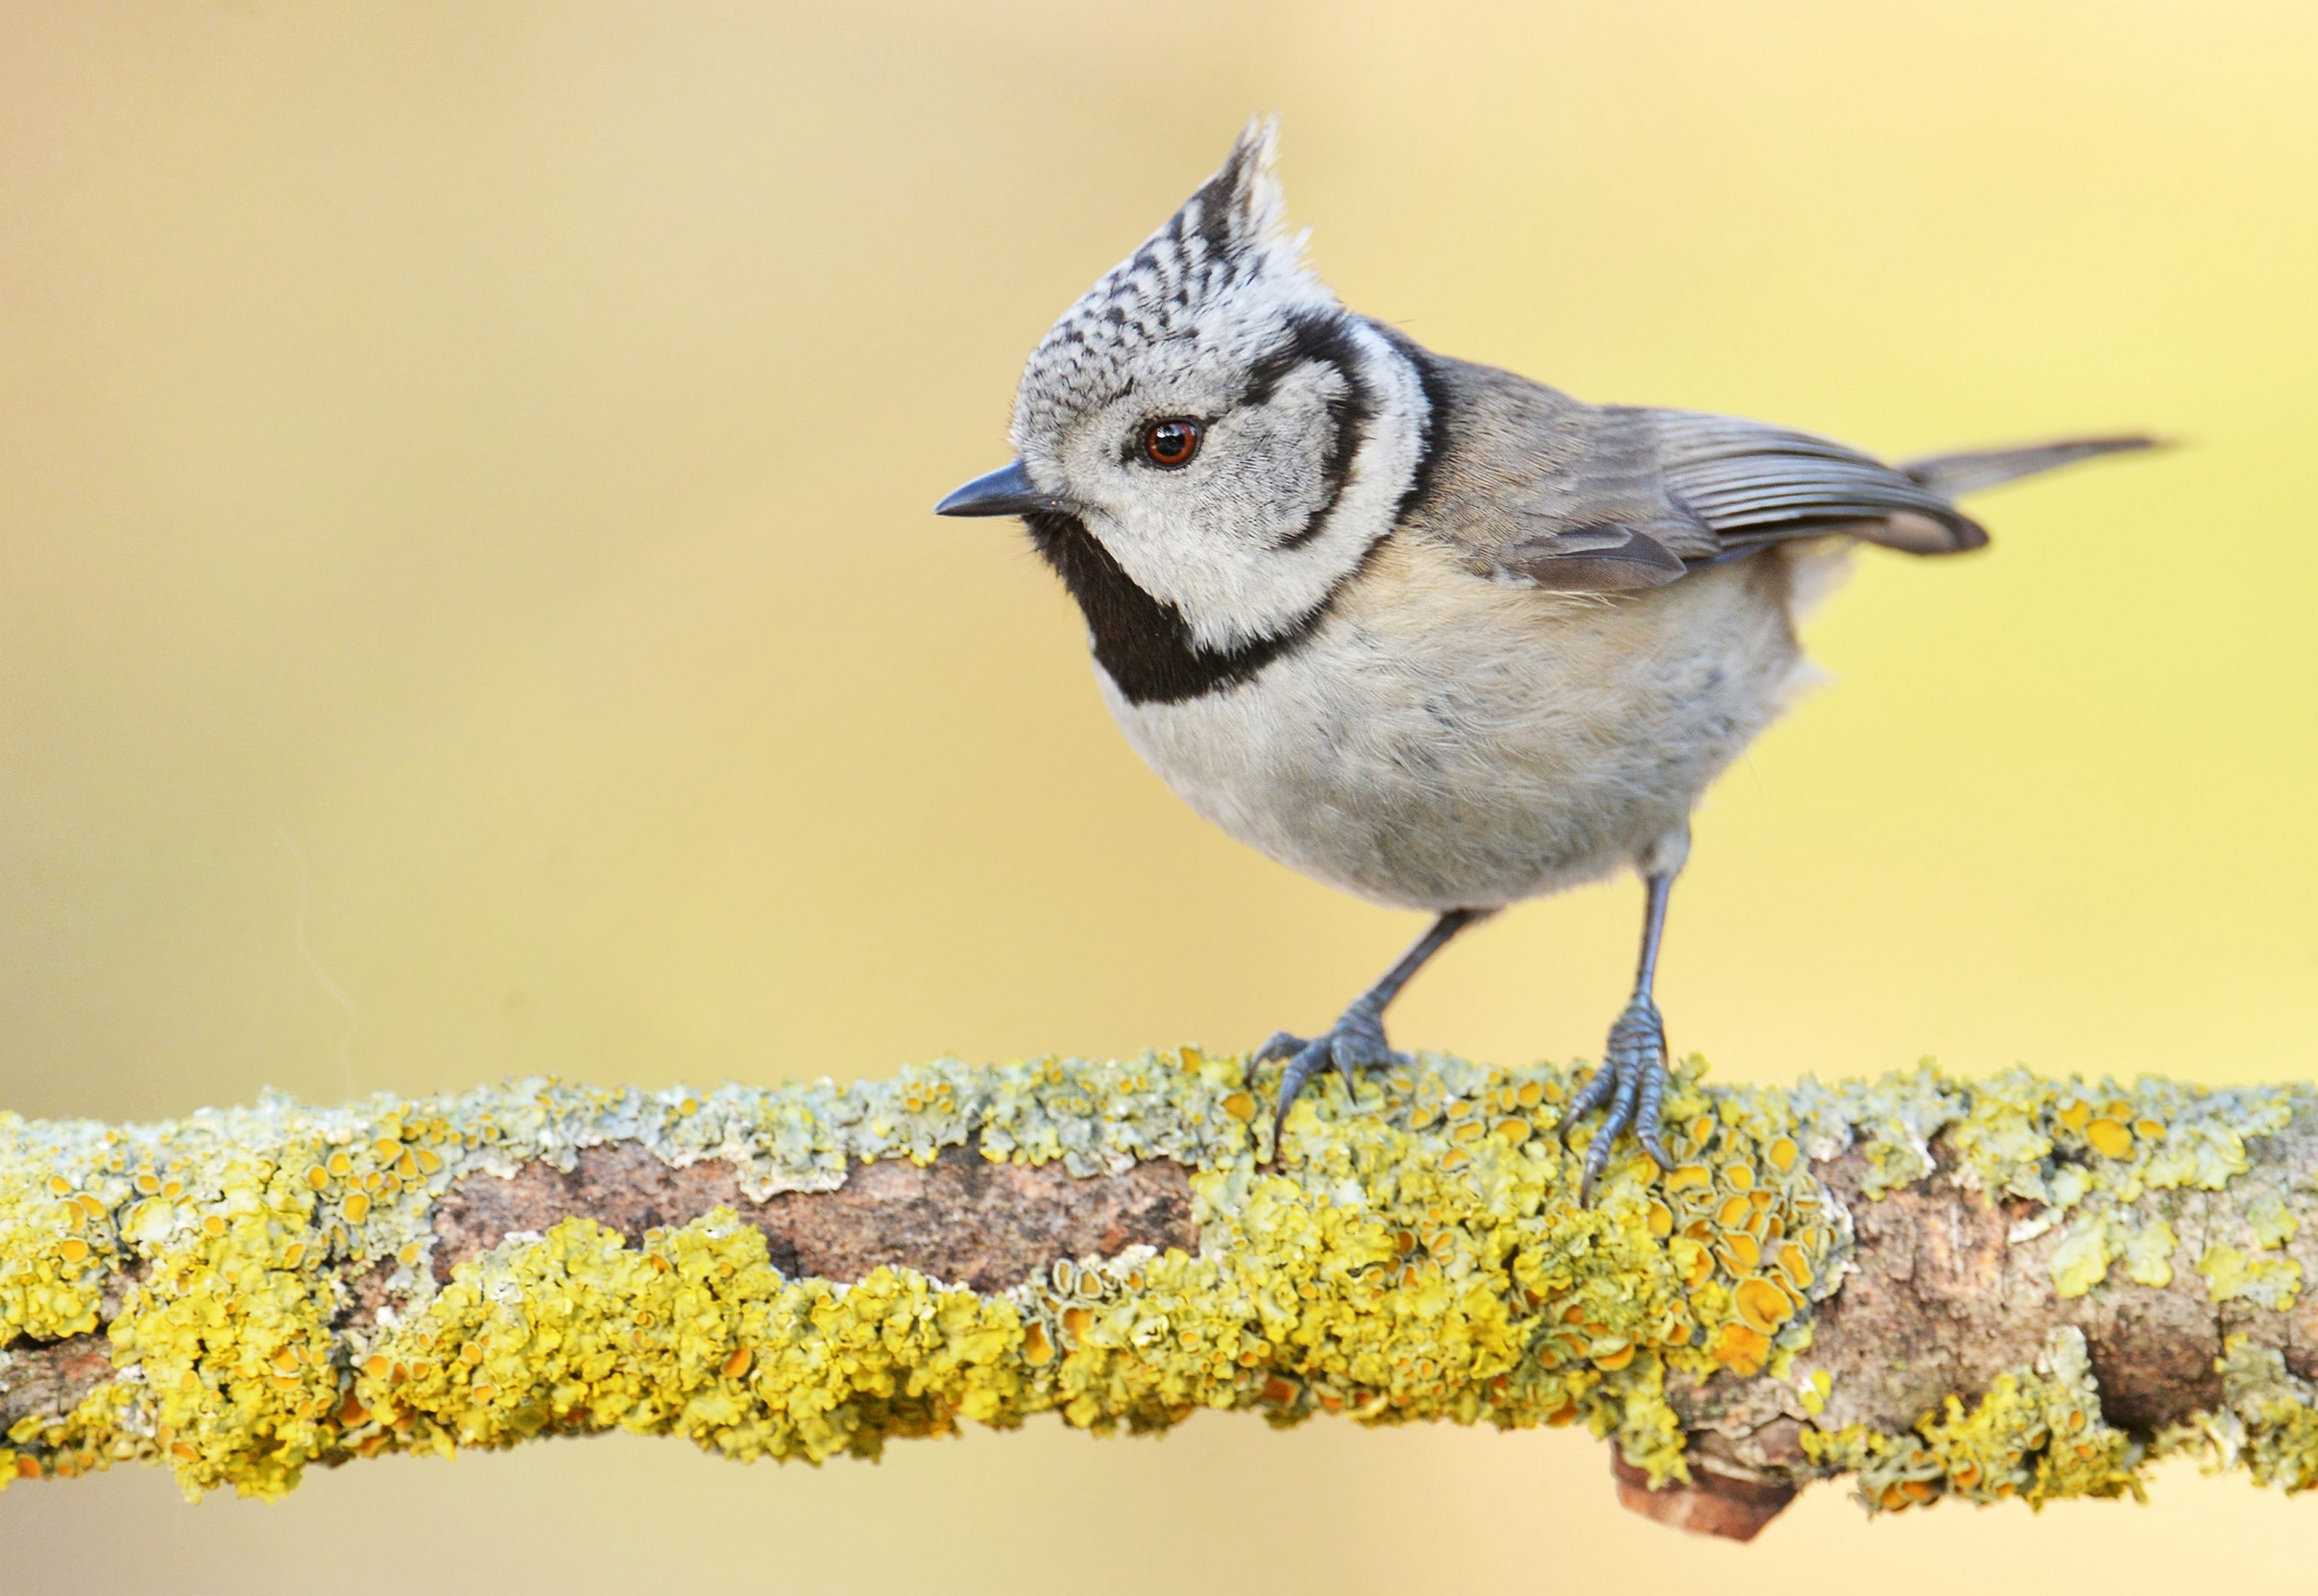 A Crested Tit perched on a yellow lichen covered branch.